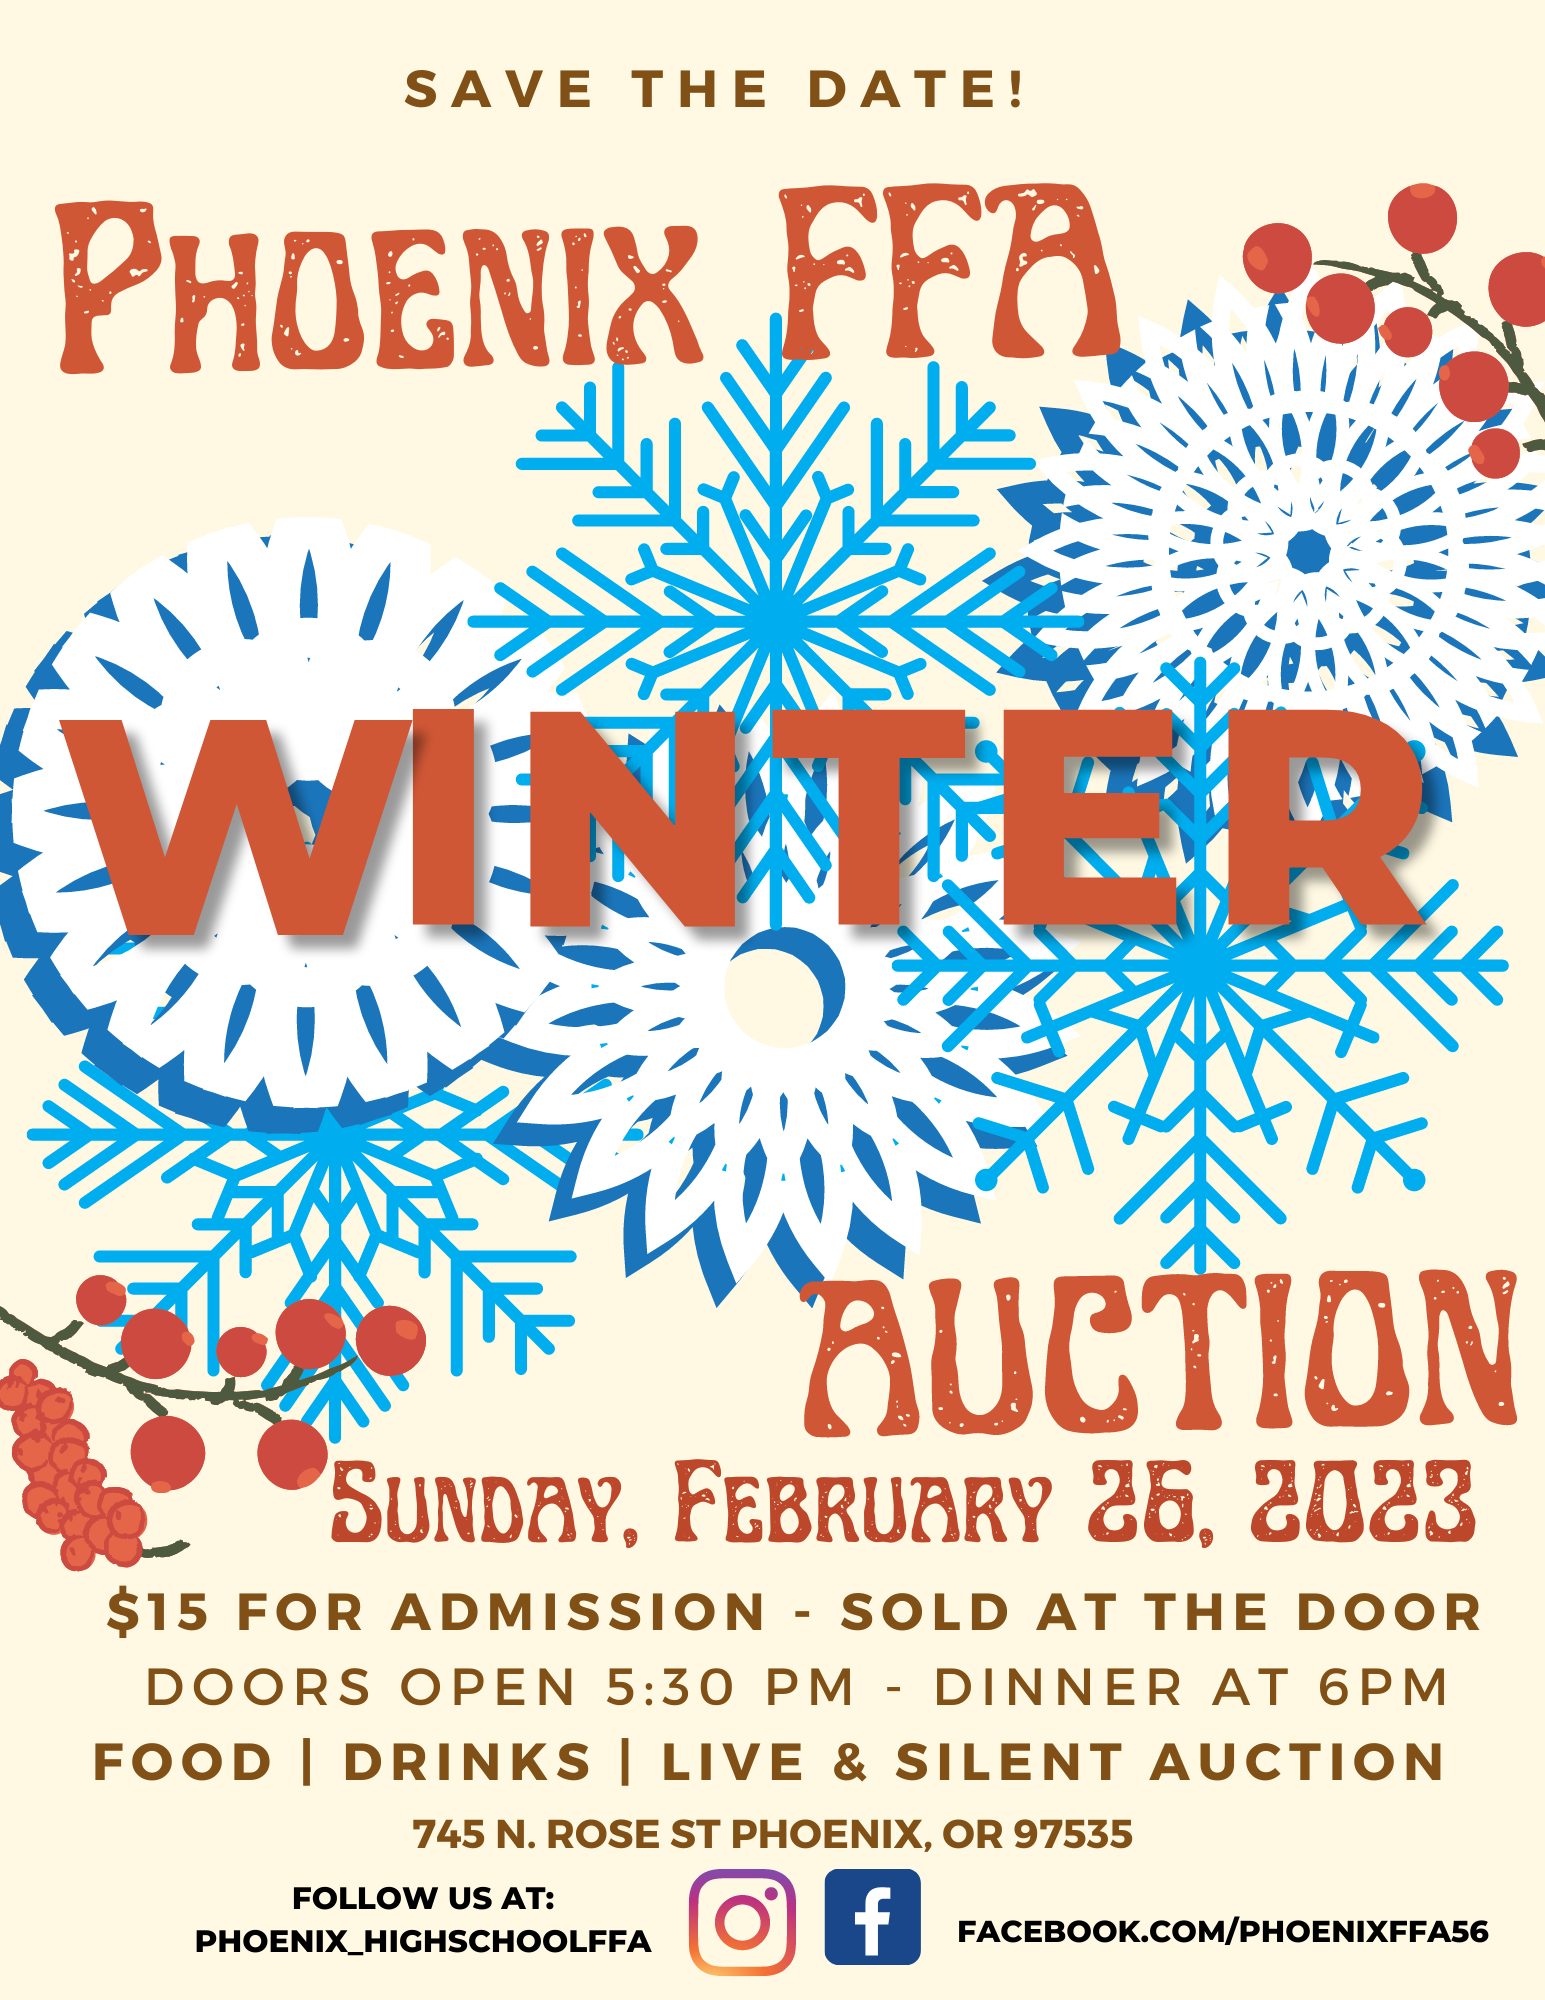 Phoenix FFA is hosting a Live and Silent Auction on Sunday, February 26th